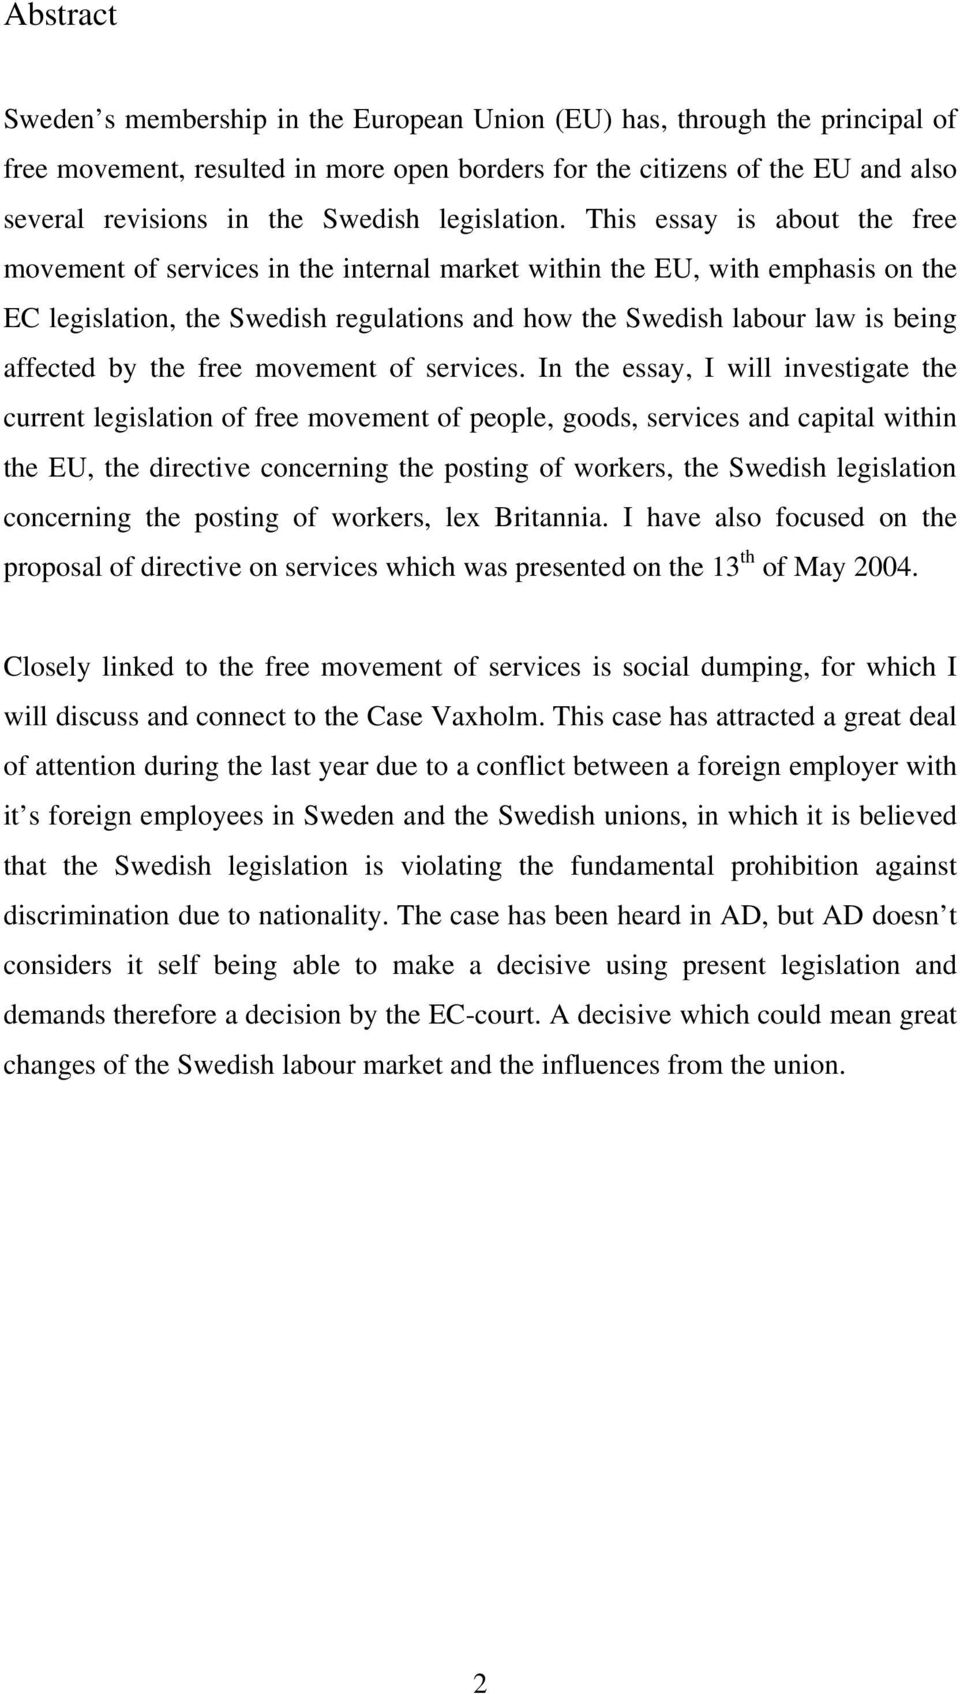 This essay is about the free movement of services in the internal market within the EU, with emphasis on the EC legislation, the Swedish regulations and how the Swedish labour law is being affected